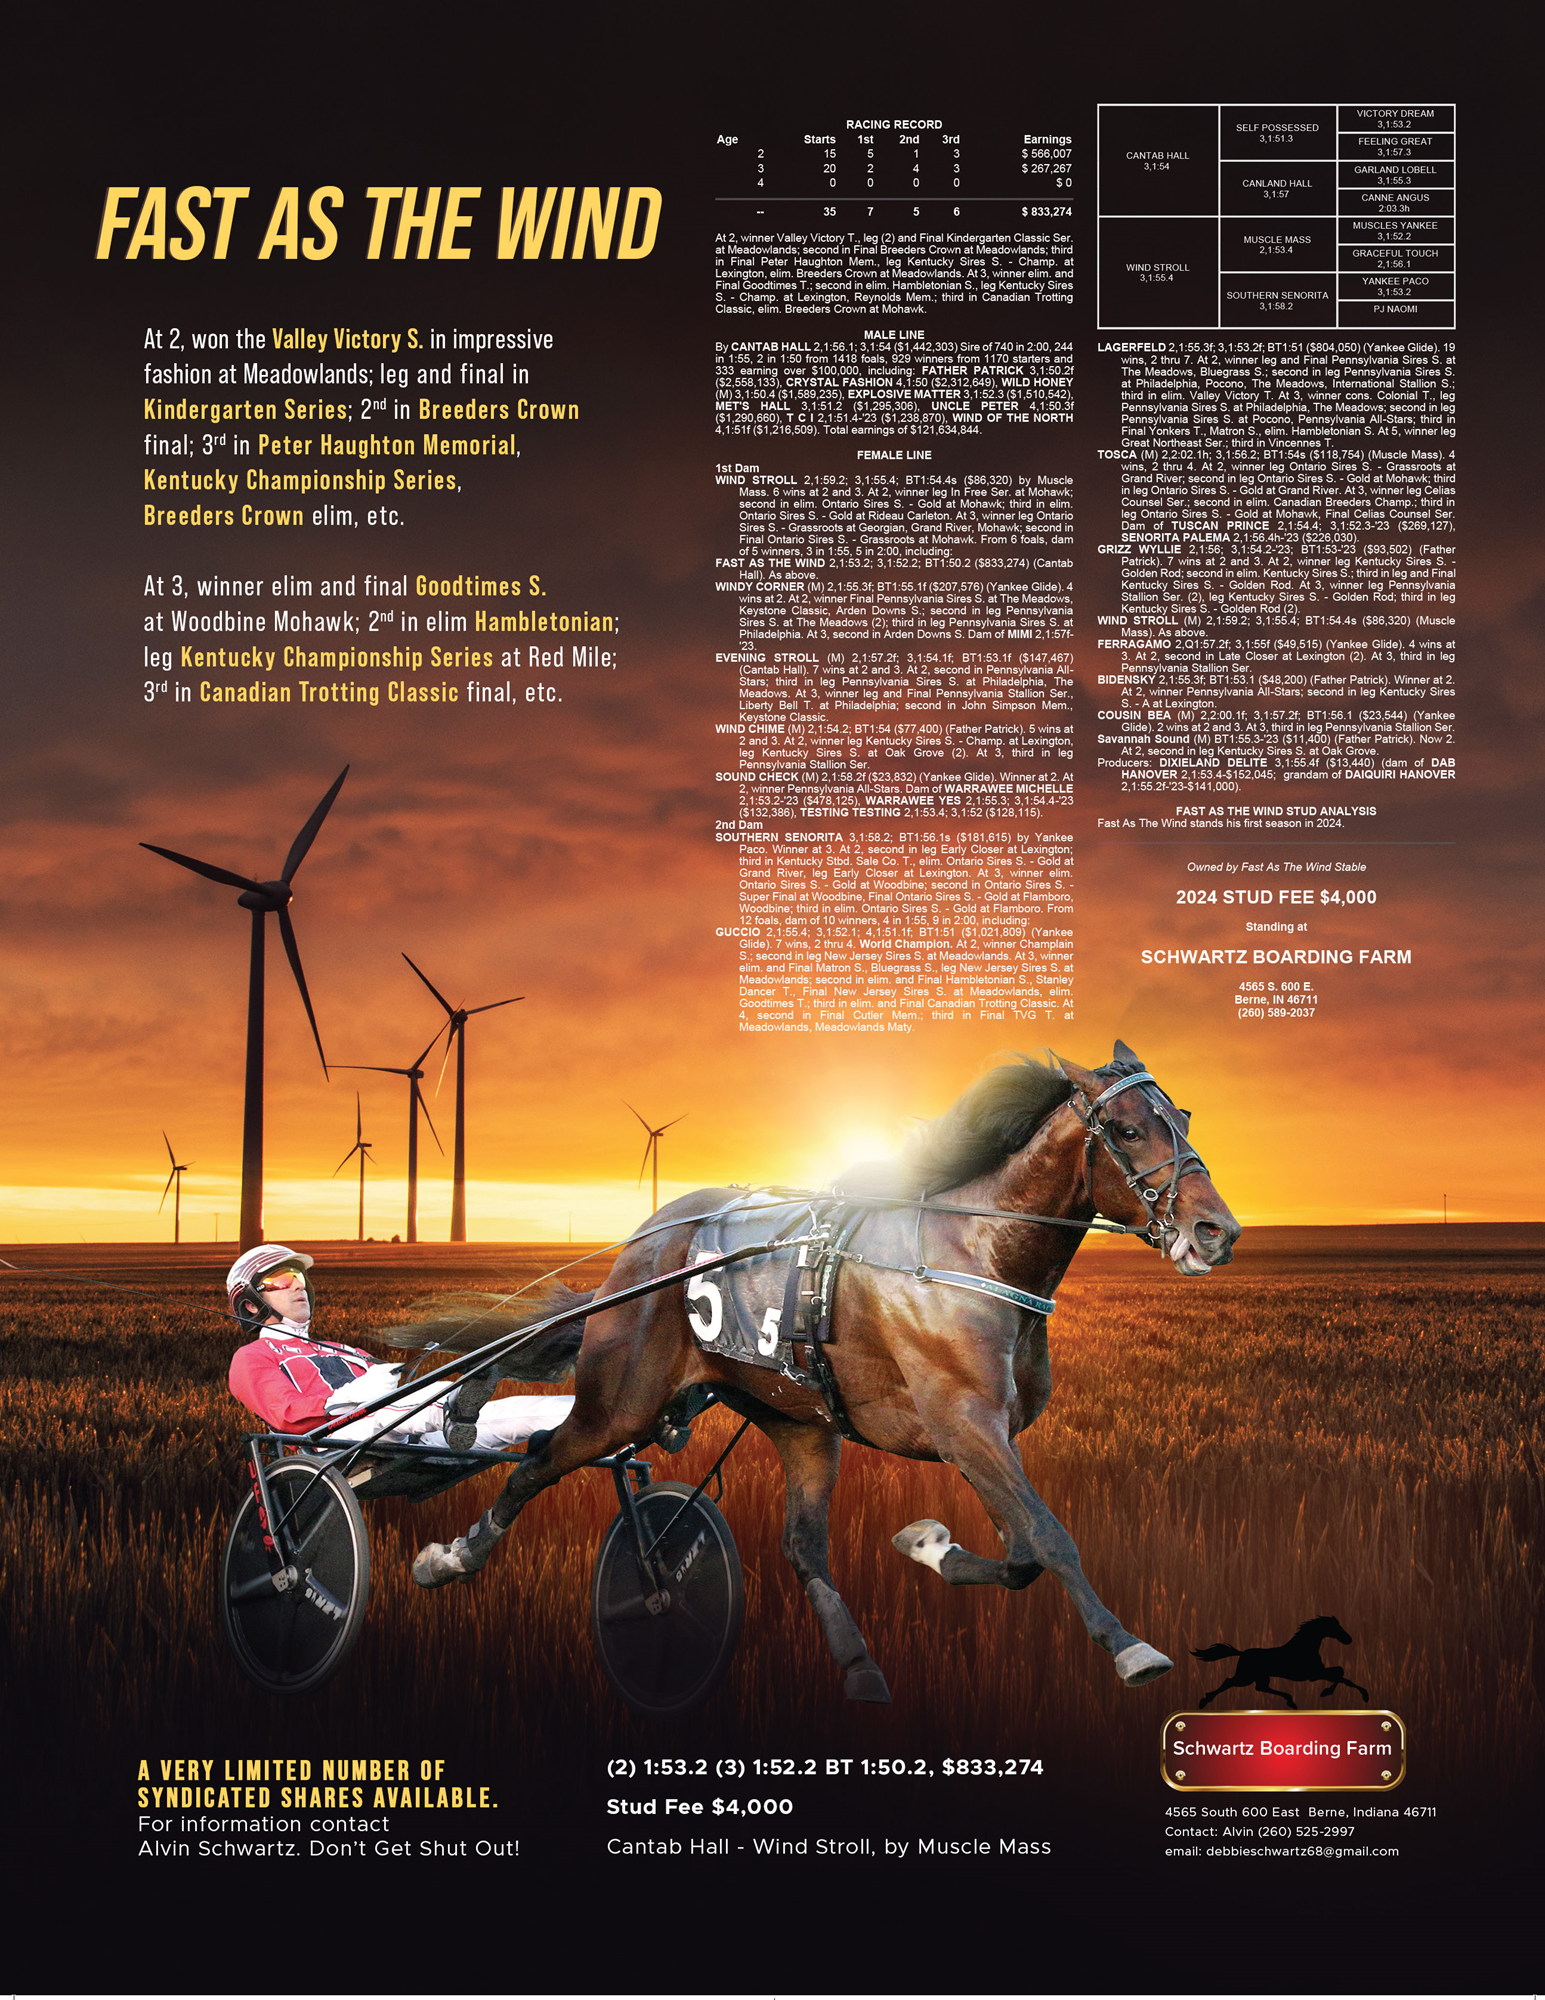 FAST AS THE WIND STANDING IN INDIANA 2024